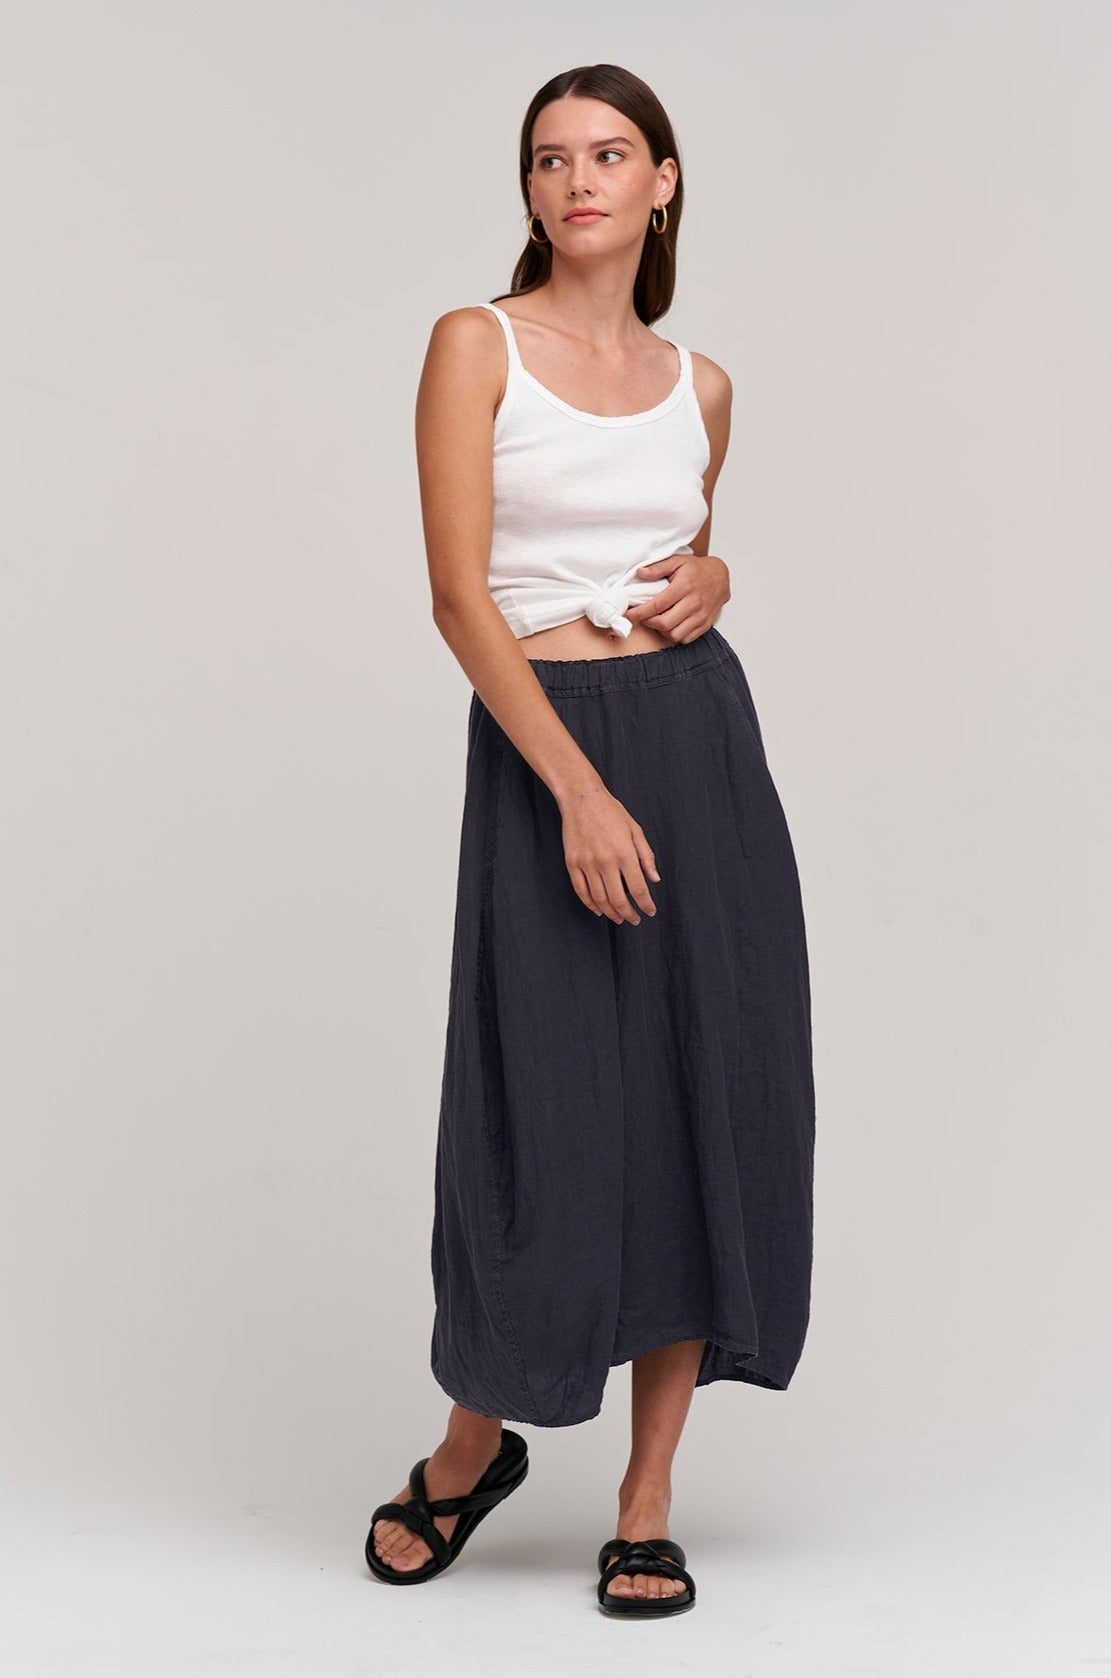   a model wearing a FAE LINEN A-LINE SKIRT by Velvet by Graham & Spencer and white tank top. 